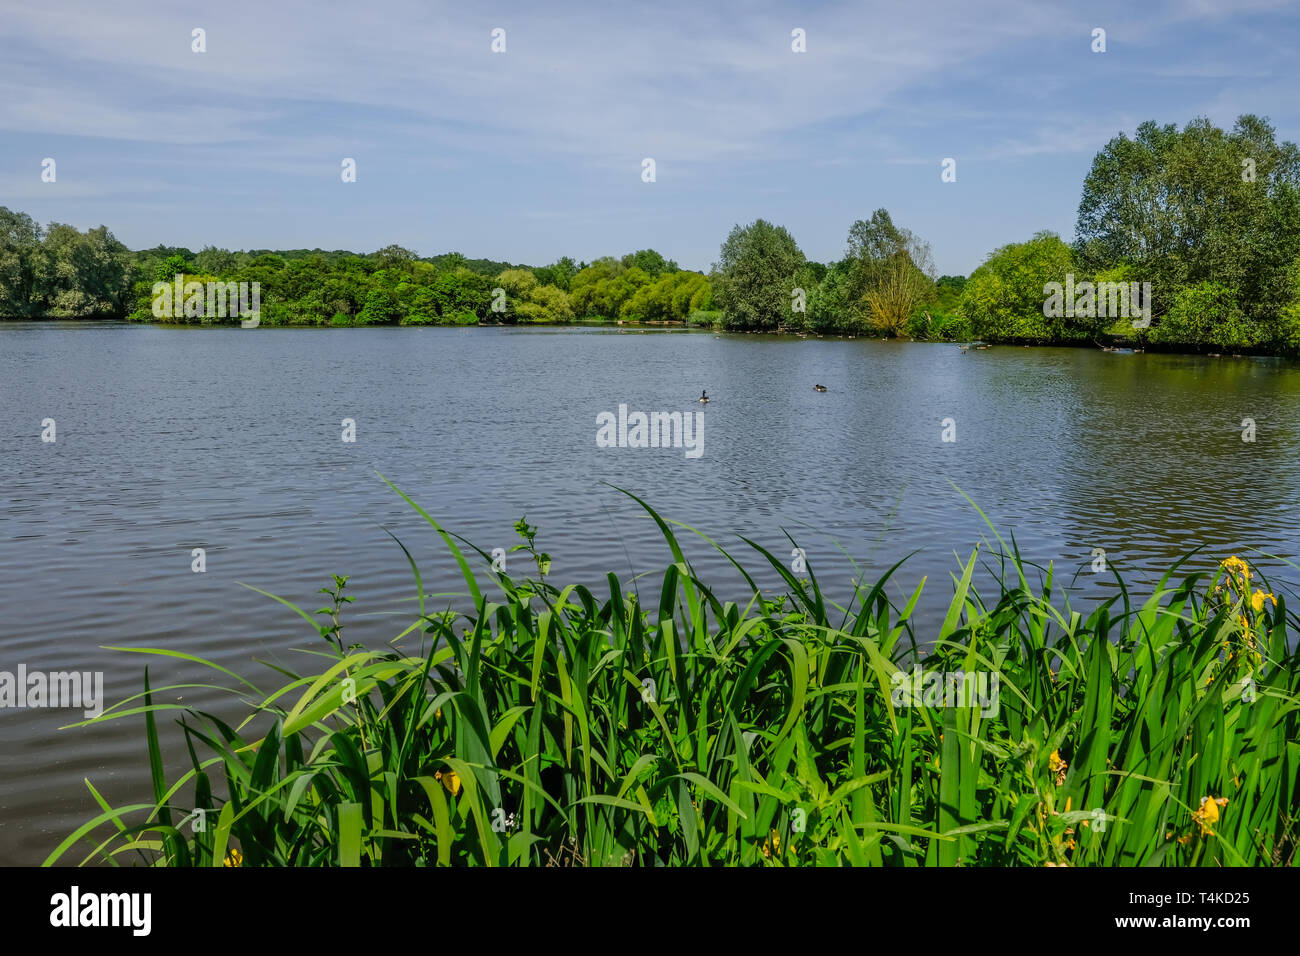 Tranquil shot of calm lake with reeds in the foreground and trees in the background.  Early summer landscape withg blue sky. Stock Photo